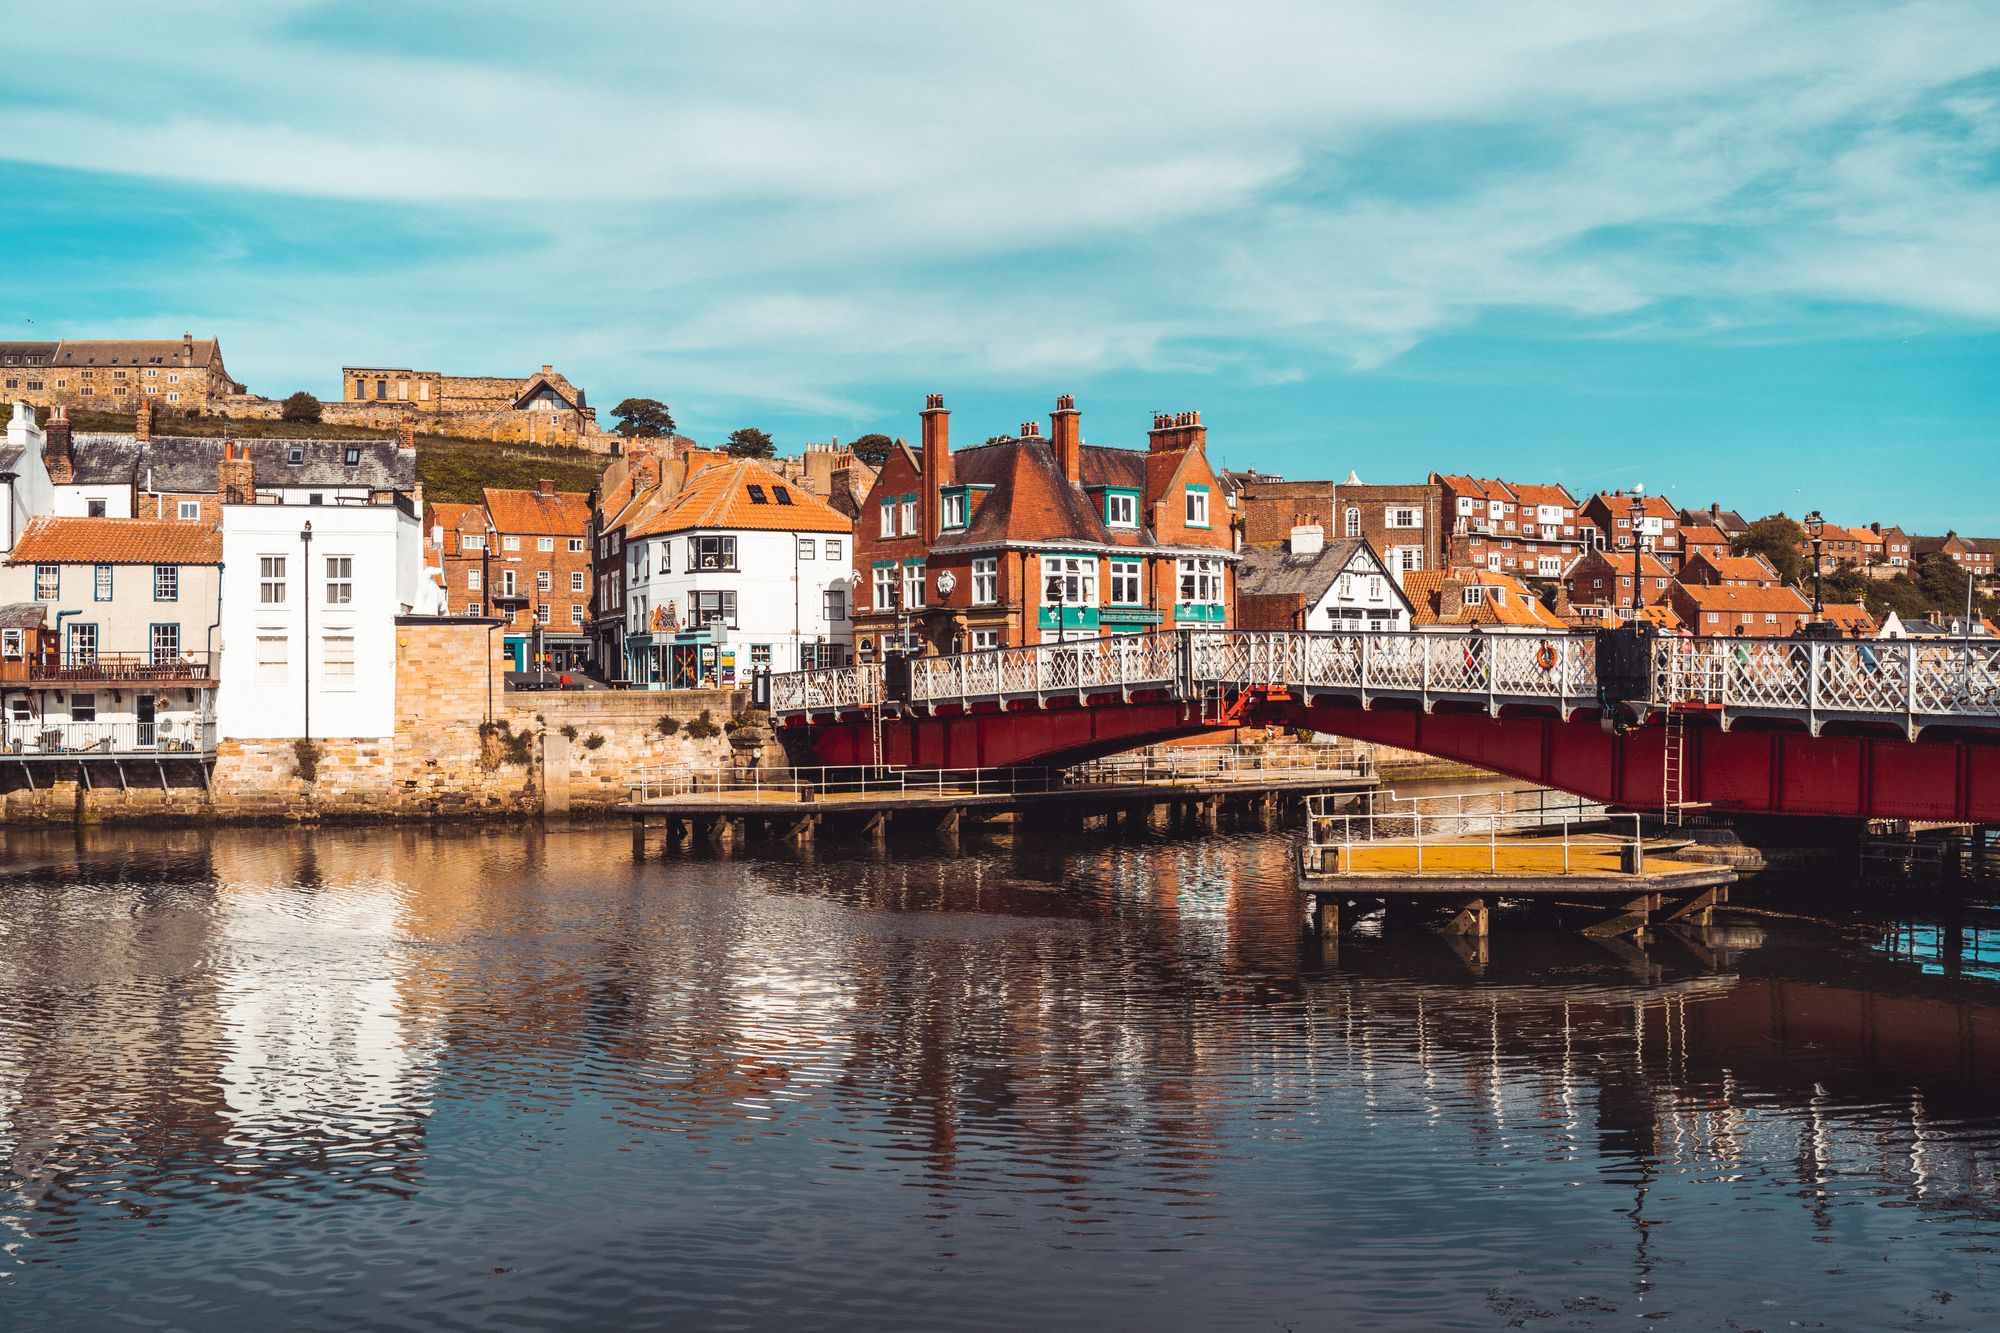 Sea view in Whitby, UK